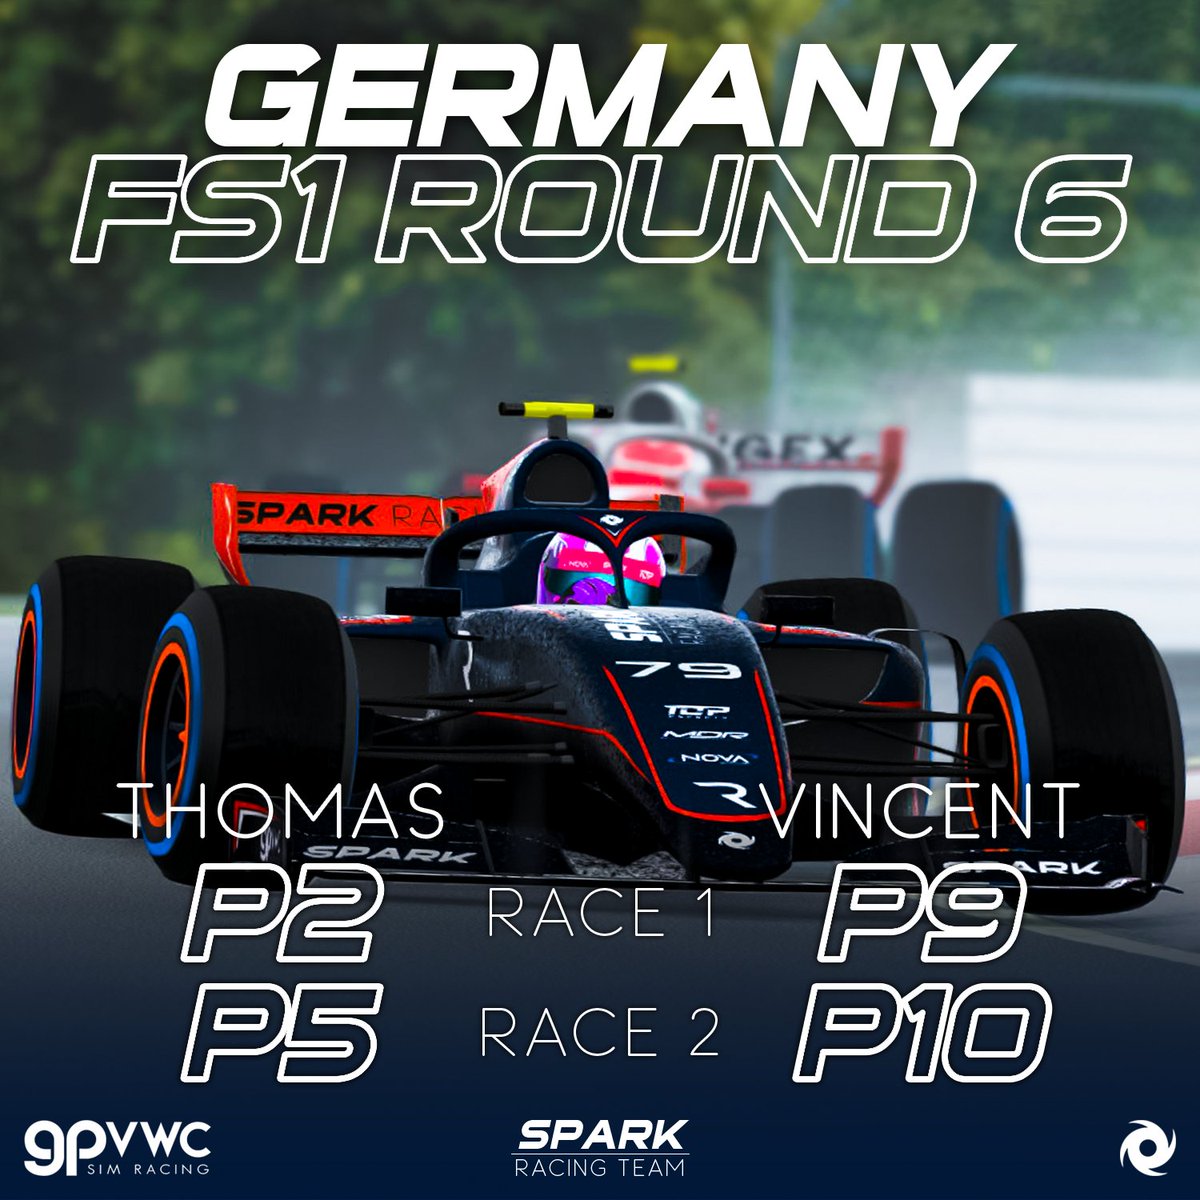 The strategy was brilliant. The wets were definitely the right choice. #gpvwc #FS1 #simracing #esports #germangp #nurburgring #nürburgring #top